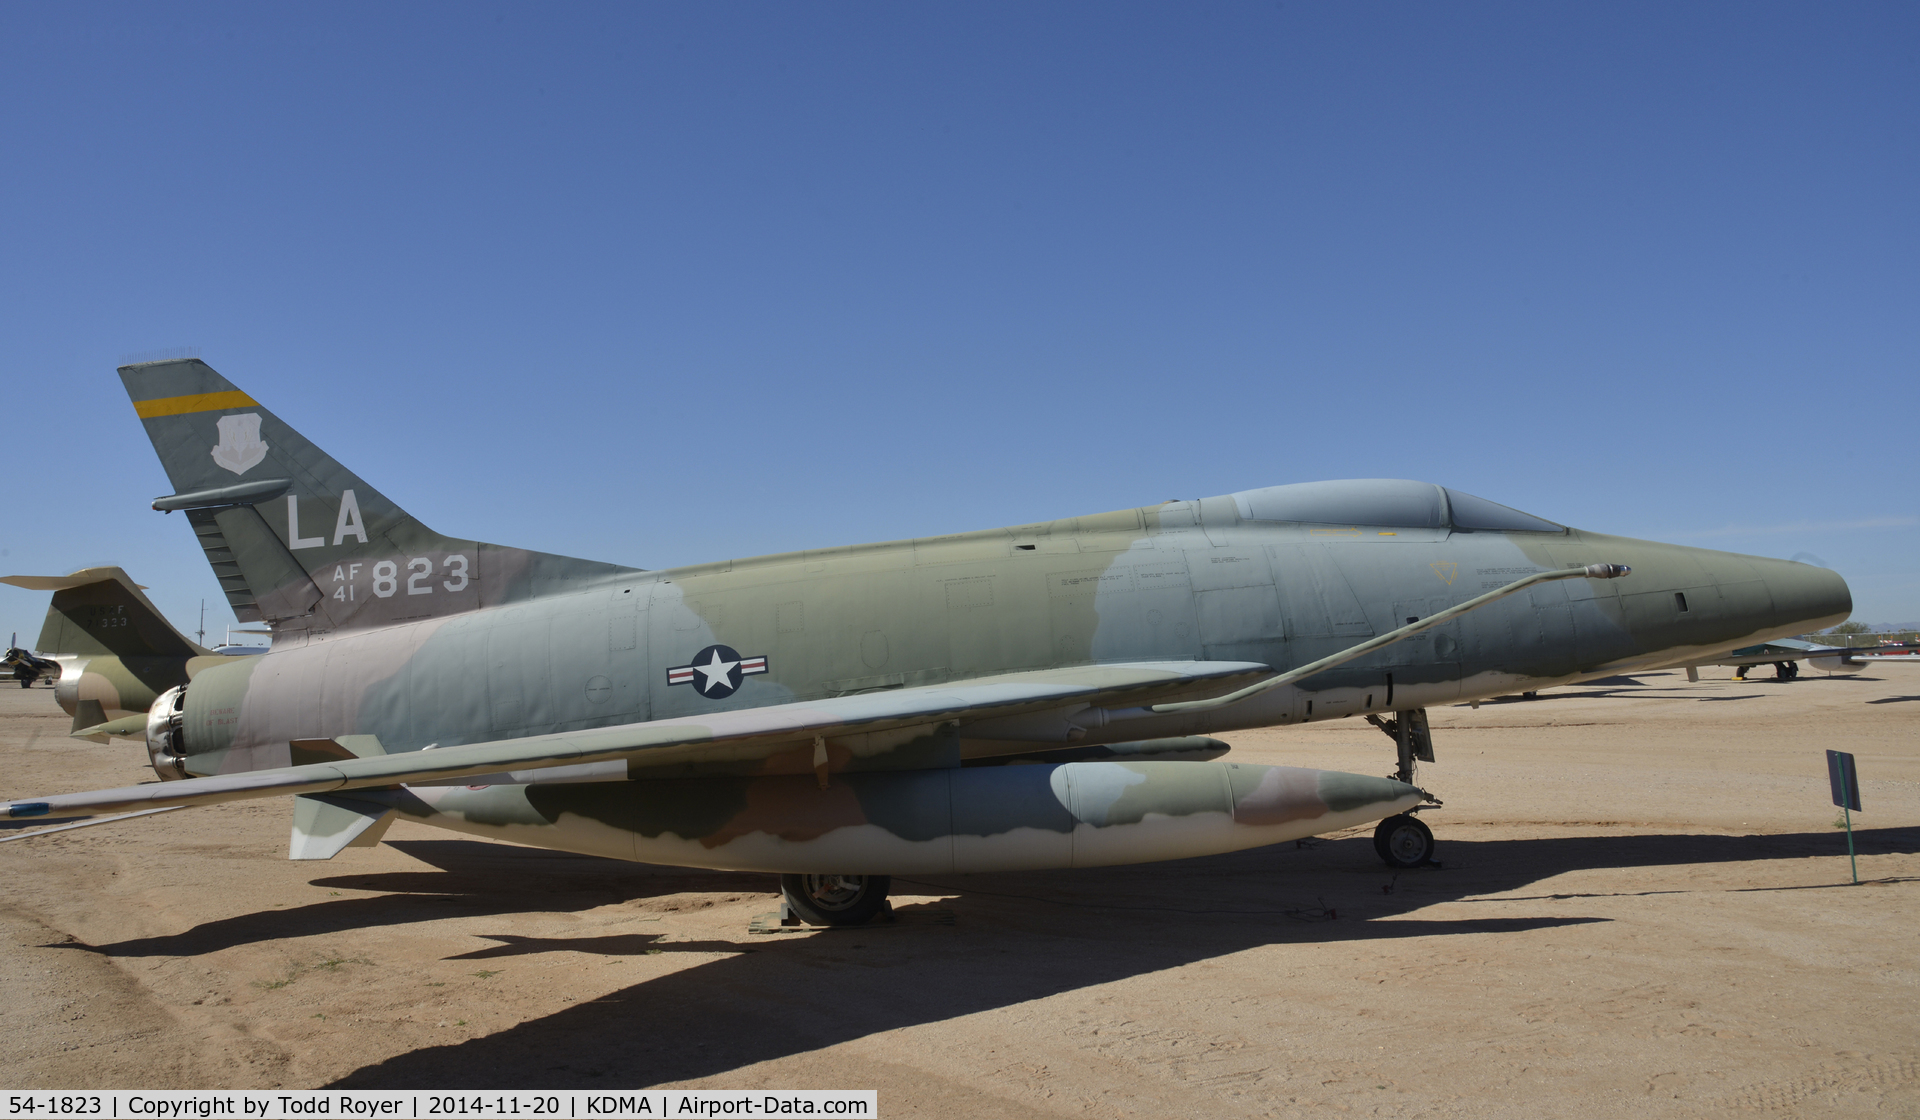 54-1823, 1954 North American F-100C Super Sabre C/N 217-84, On display at the Pima Air and Space Museum